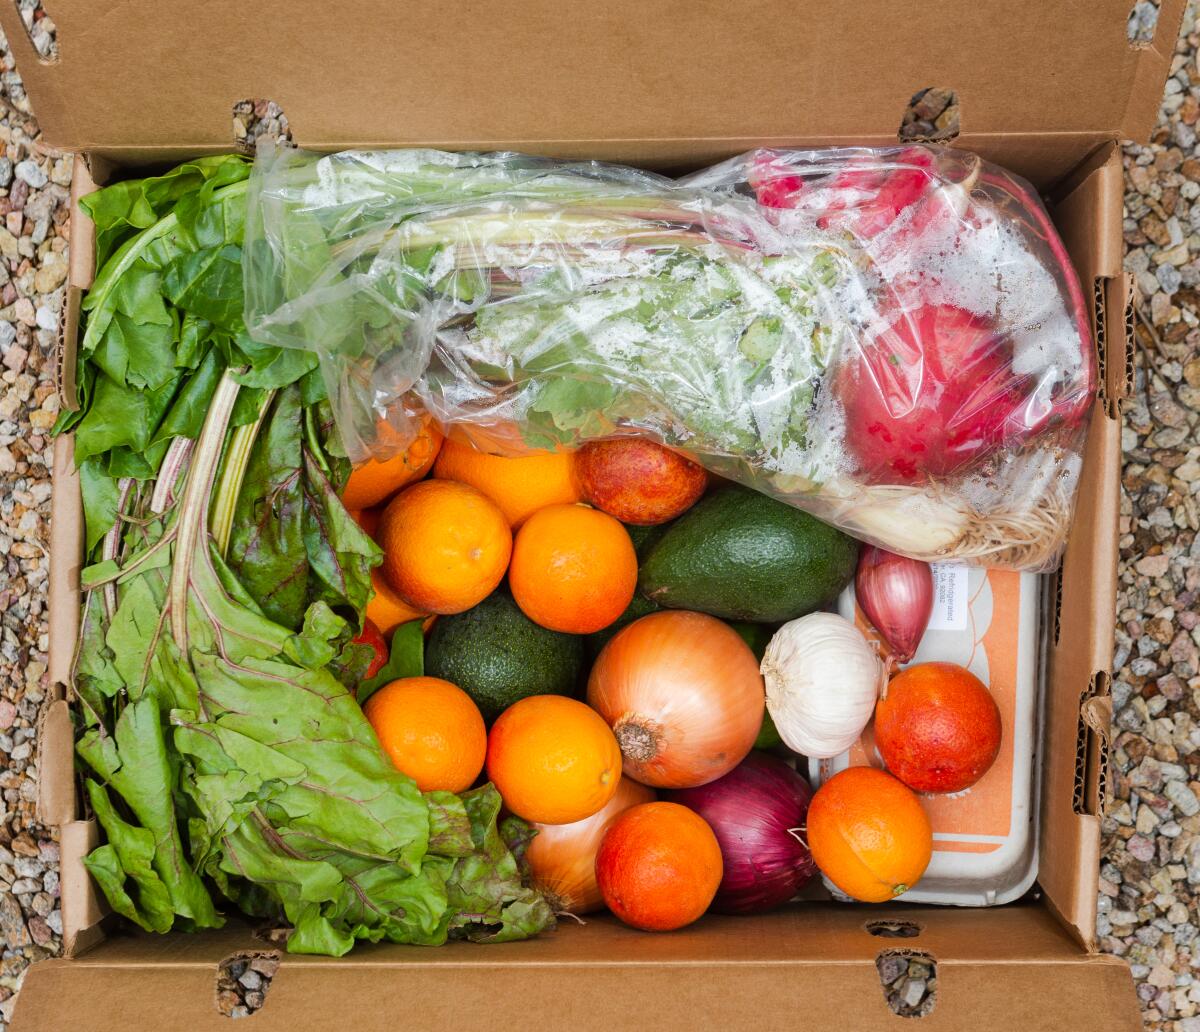 A produce box from Schaner Farms with navel oranges, blood oranges, lemons, limes, yellow and red onions, garlic, shallots, avocados, spring onions, rainbow beets, eggs and French breakfast radishes. Lady & Larder is a distrubution center for Schaner Farms produce boxes. The contents of the box change every week. 